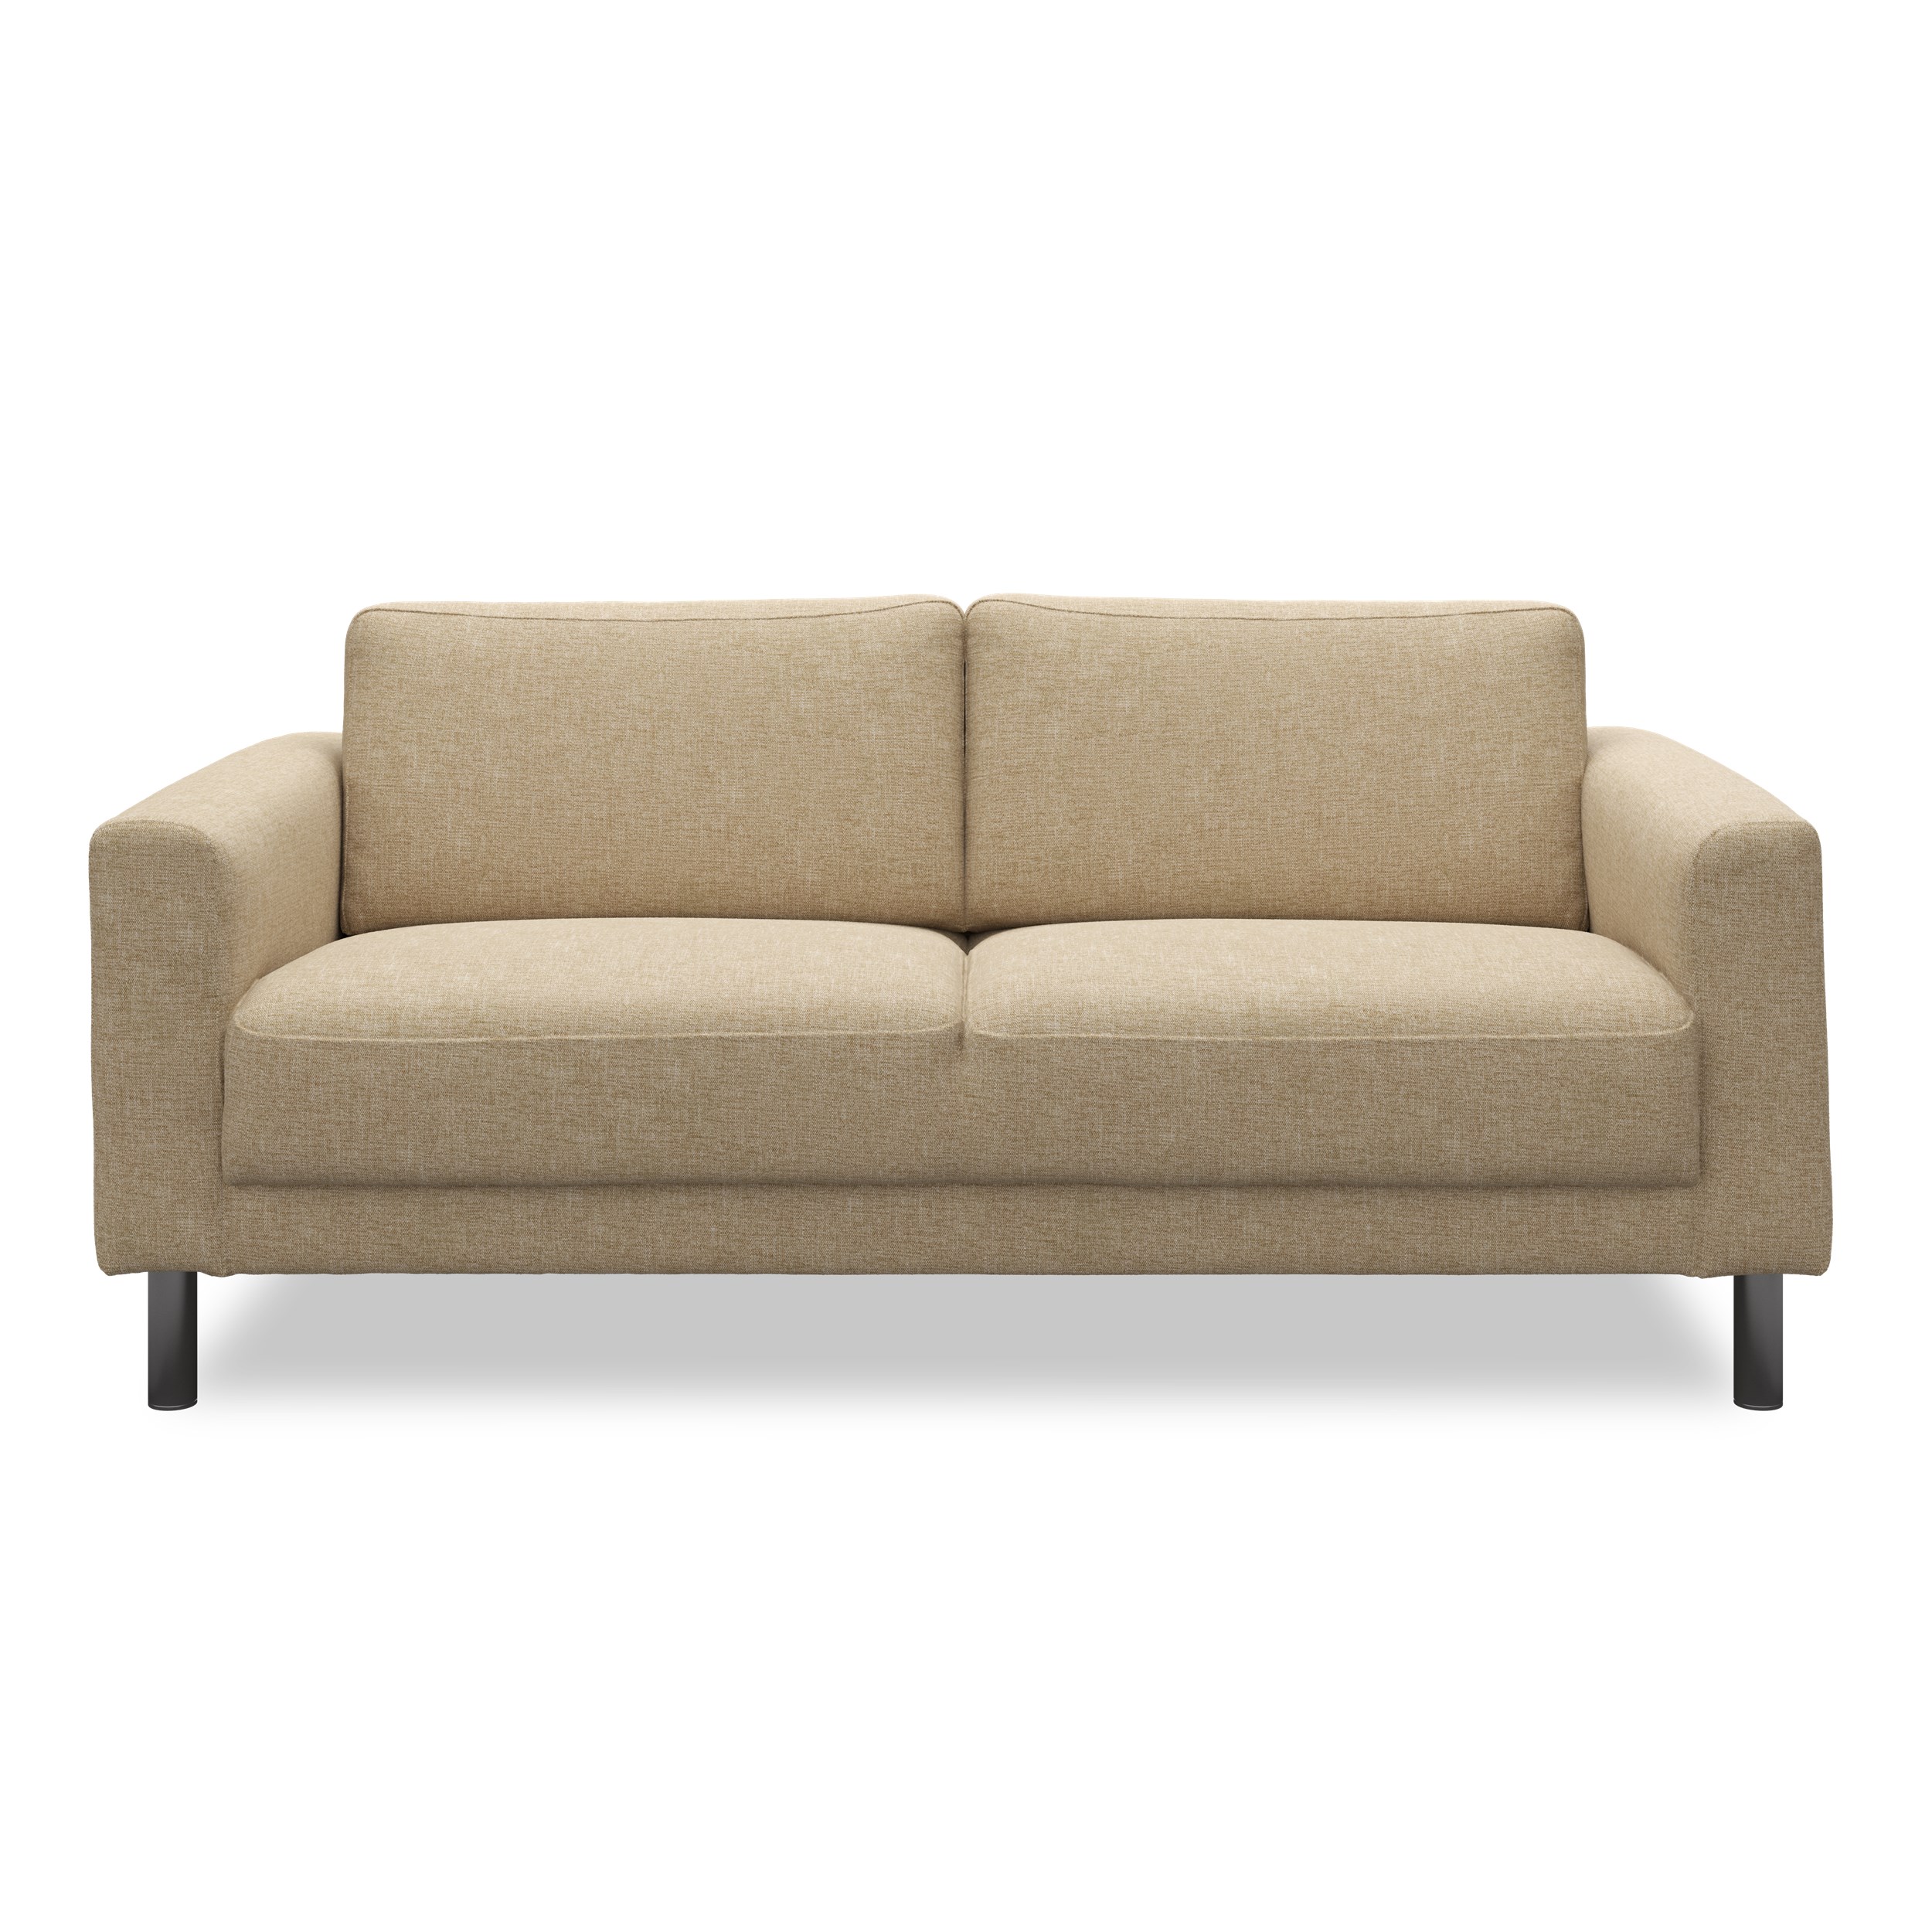 Cleveland 2 pers. Sofa 